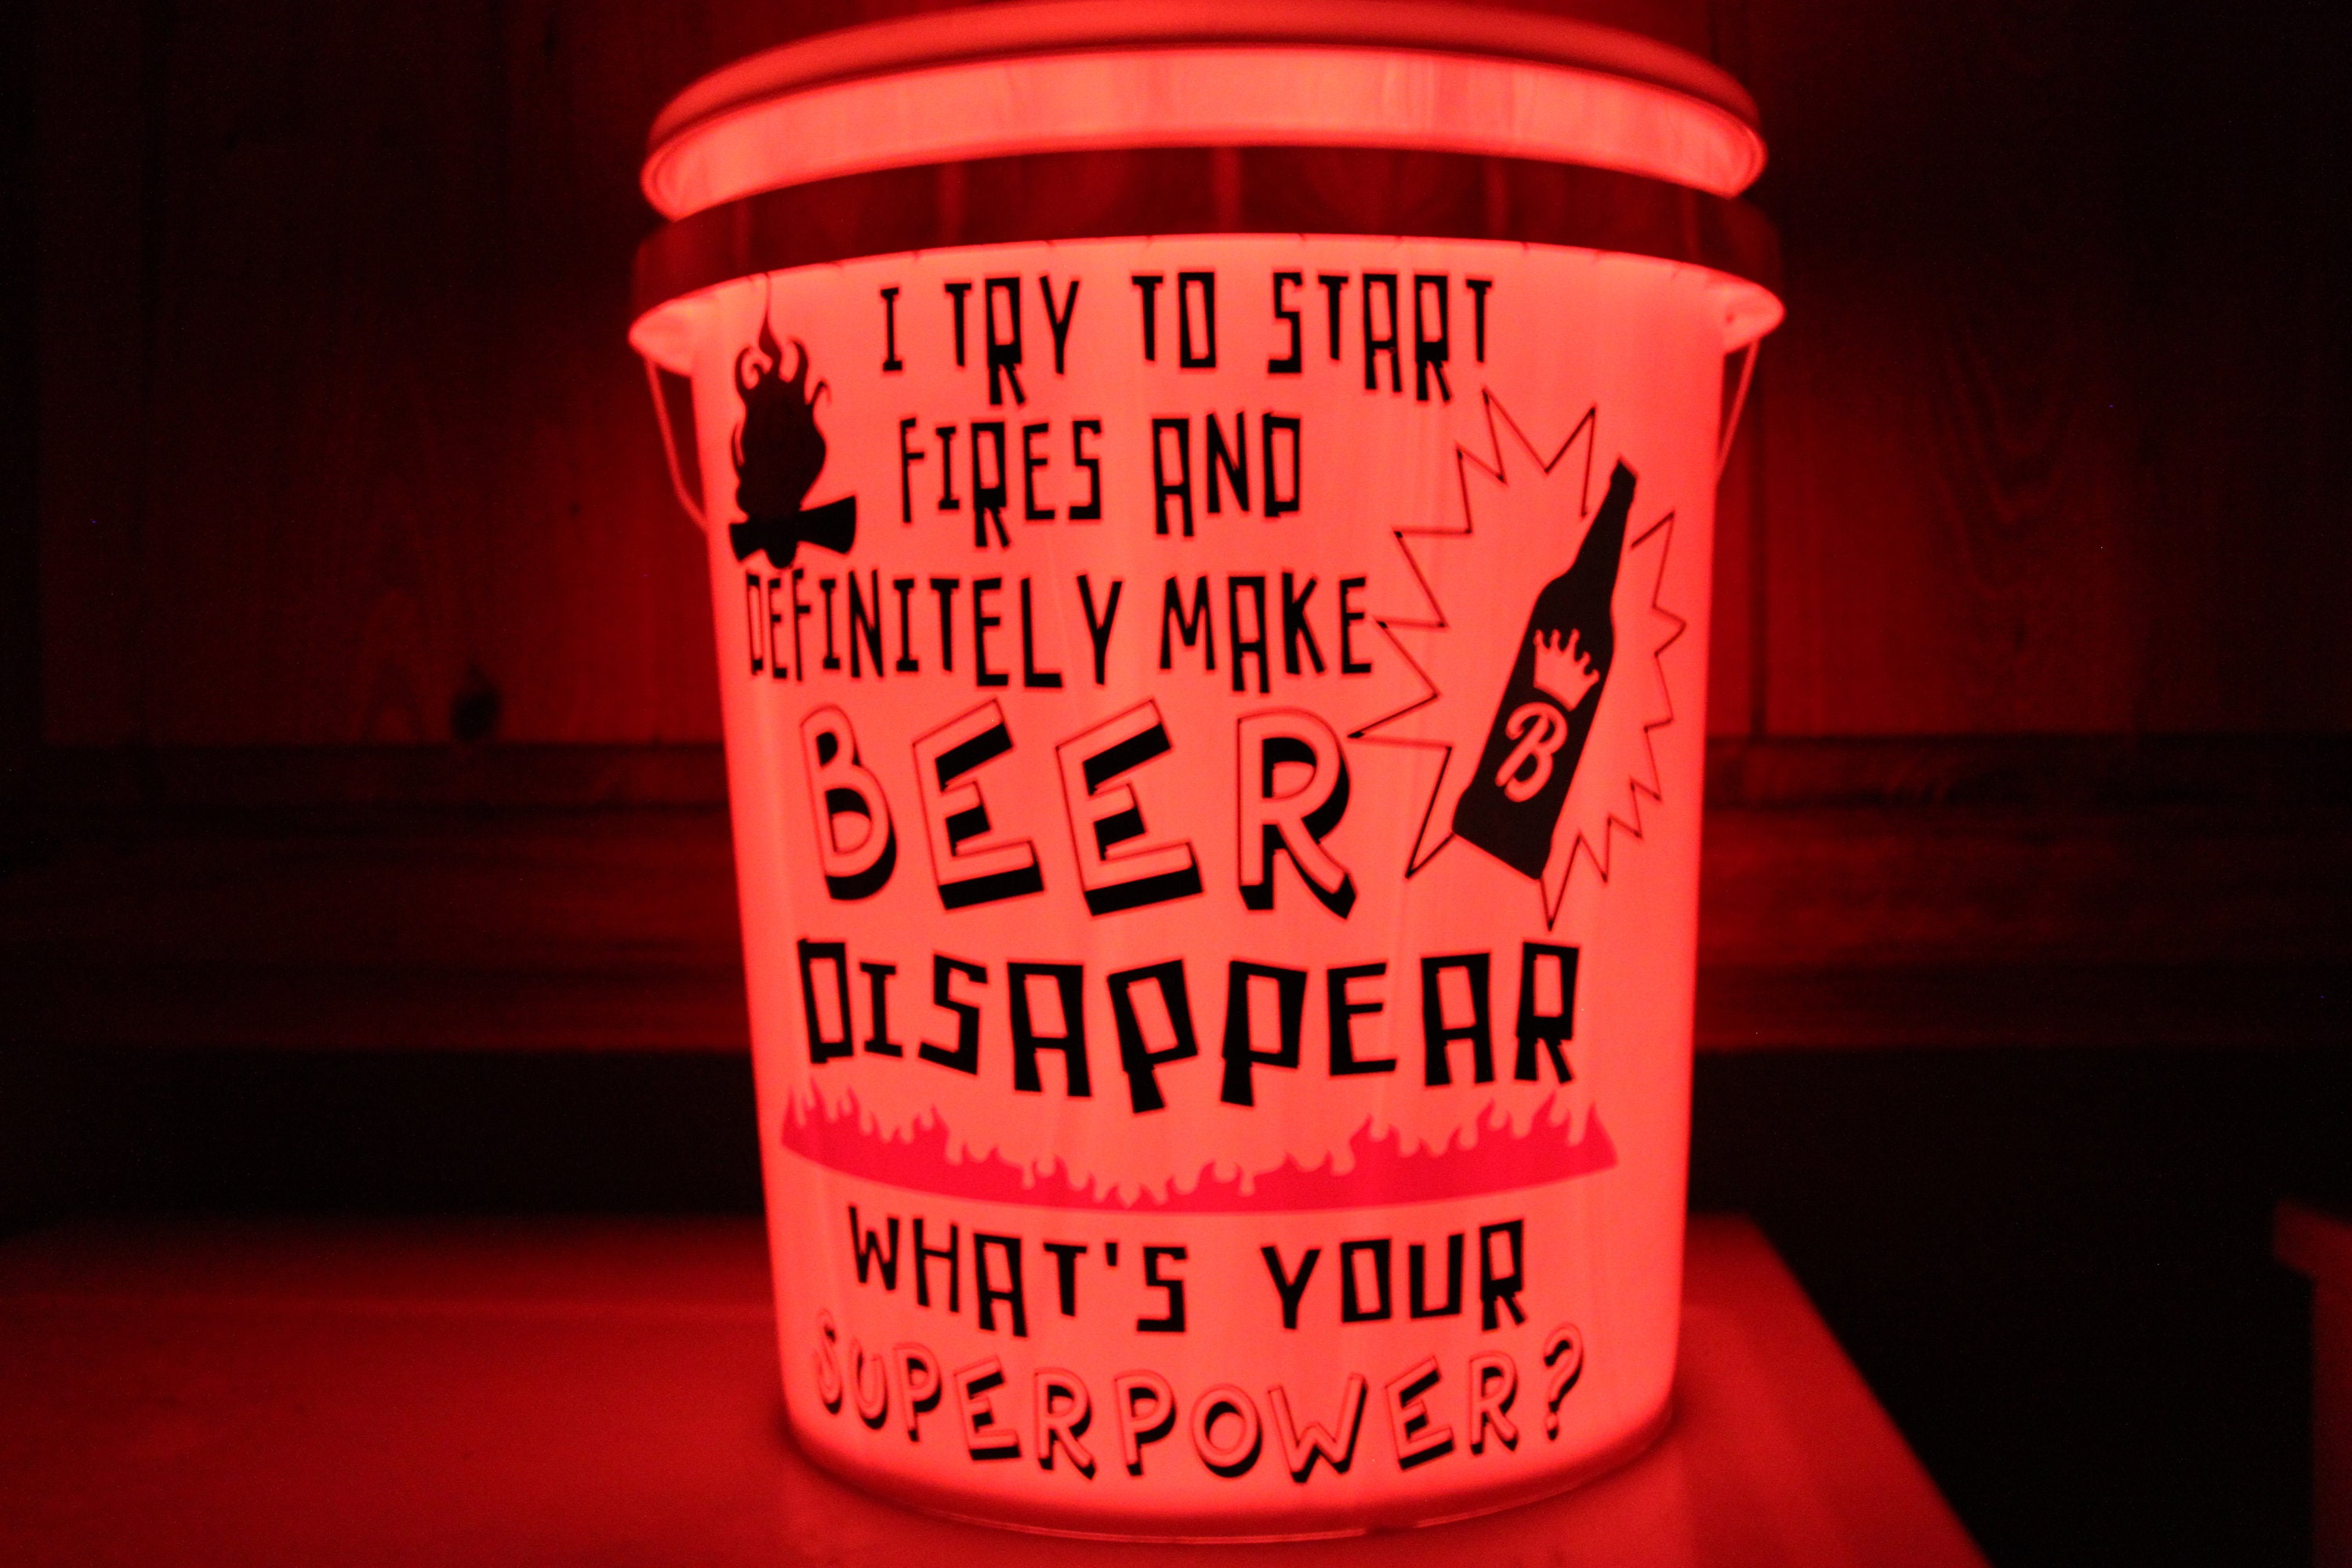 LED Light up Buckets, Personalized LED Bucket, Camping LED Bucket, Camping  Decor, Father's Day Gift, Bucket Light, Camping Gift 